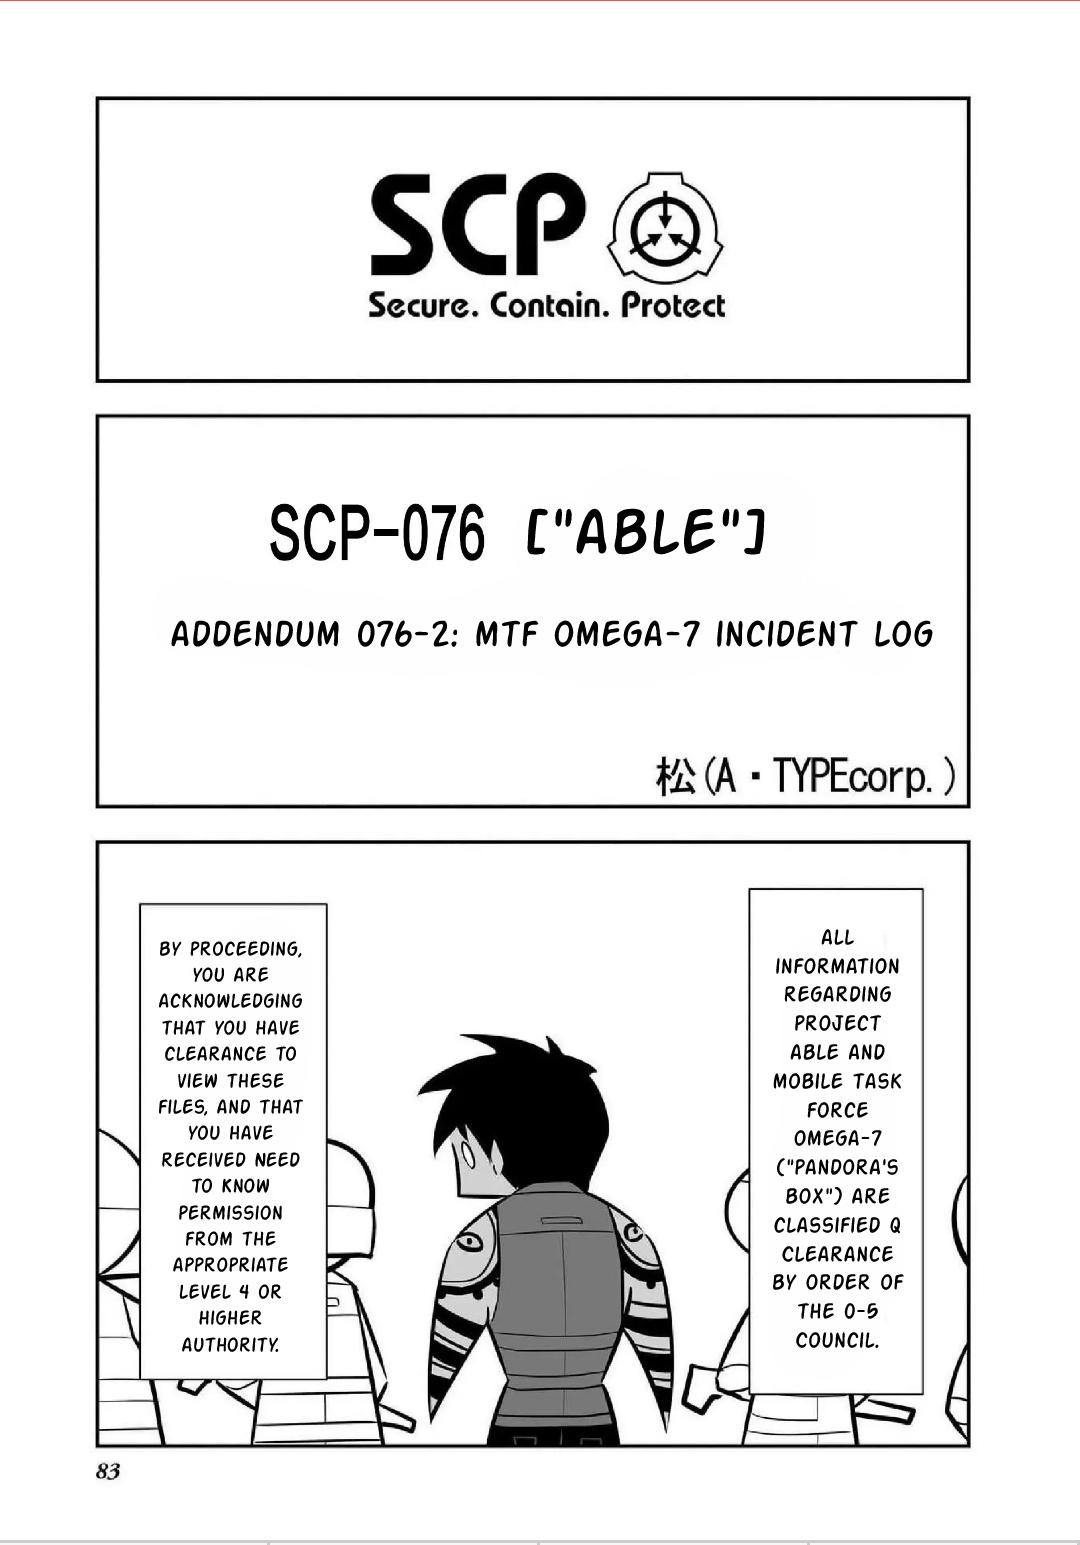 Read Scp Comic Anthology - Kai Vol.1 Chapter 7: Scp-076 - Mtf